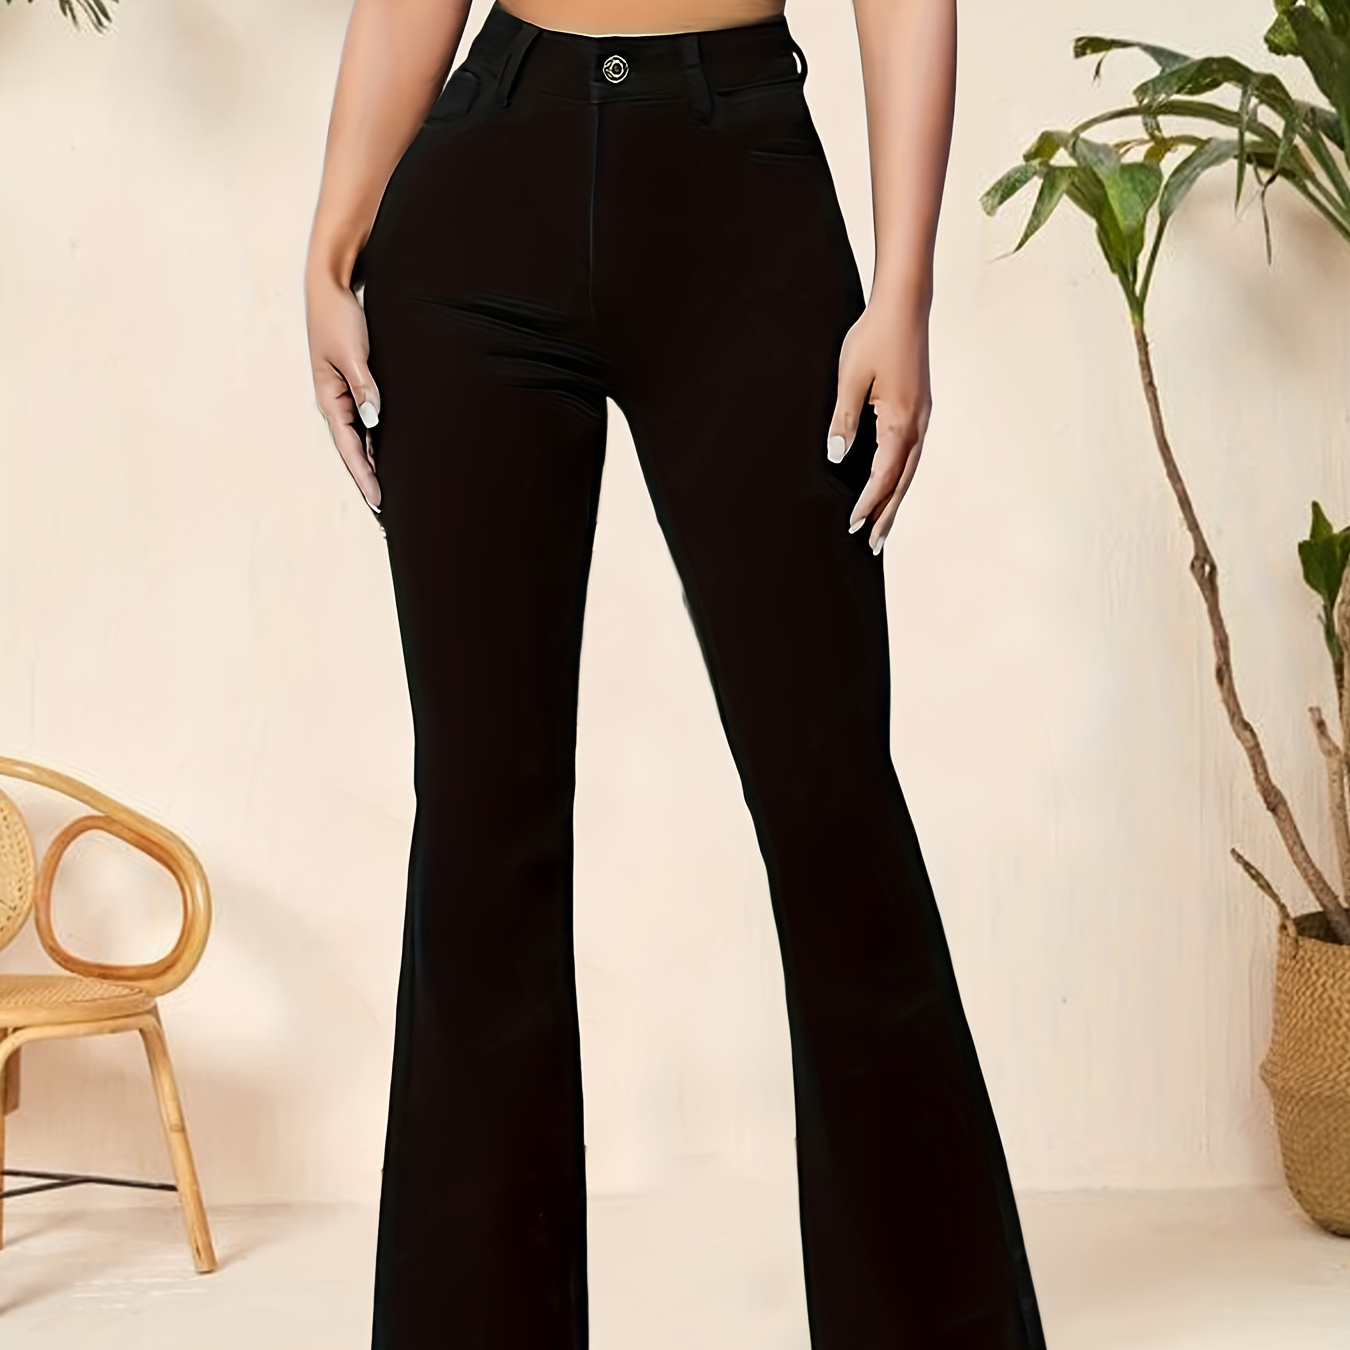 

Black High Waist Flare Jeans, High-stretch Fashion Bell Bottom Jeans, Women's Denim Jeans & Clothing